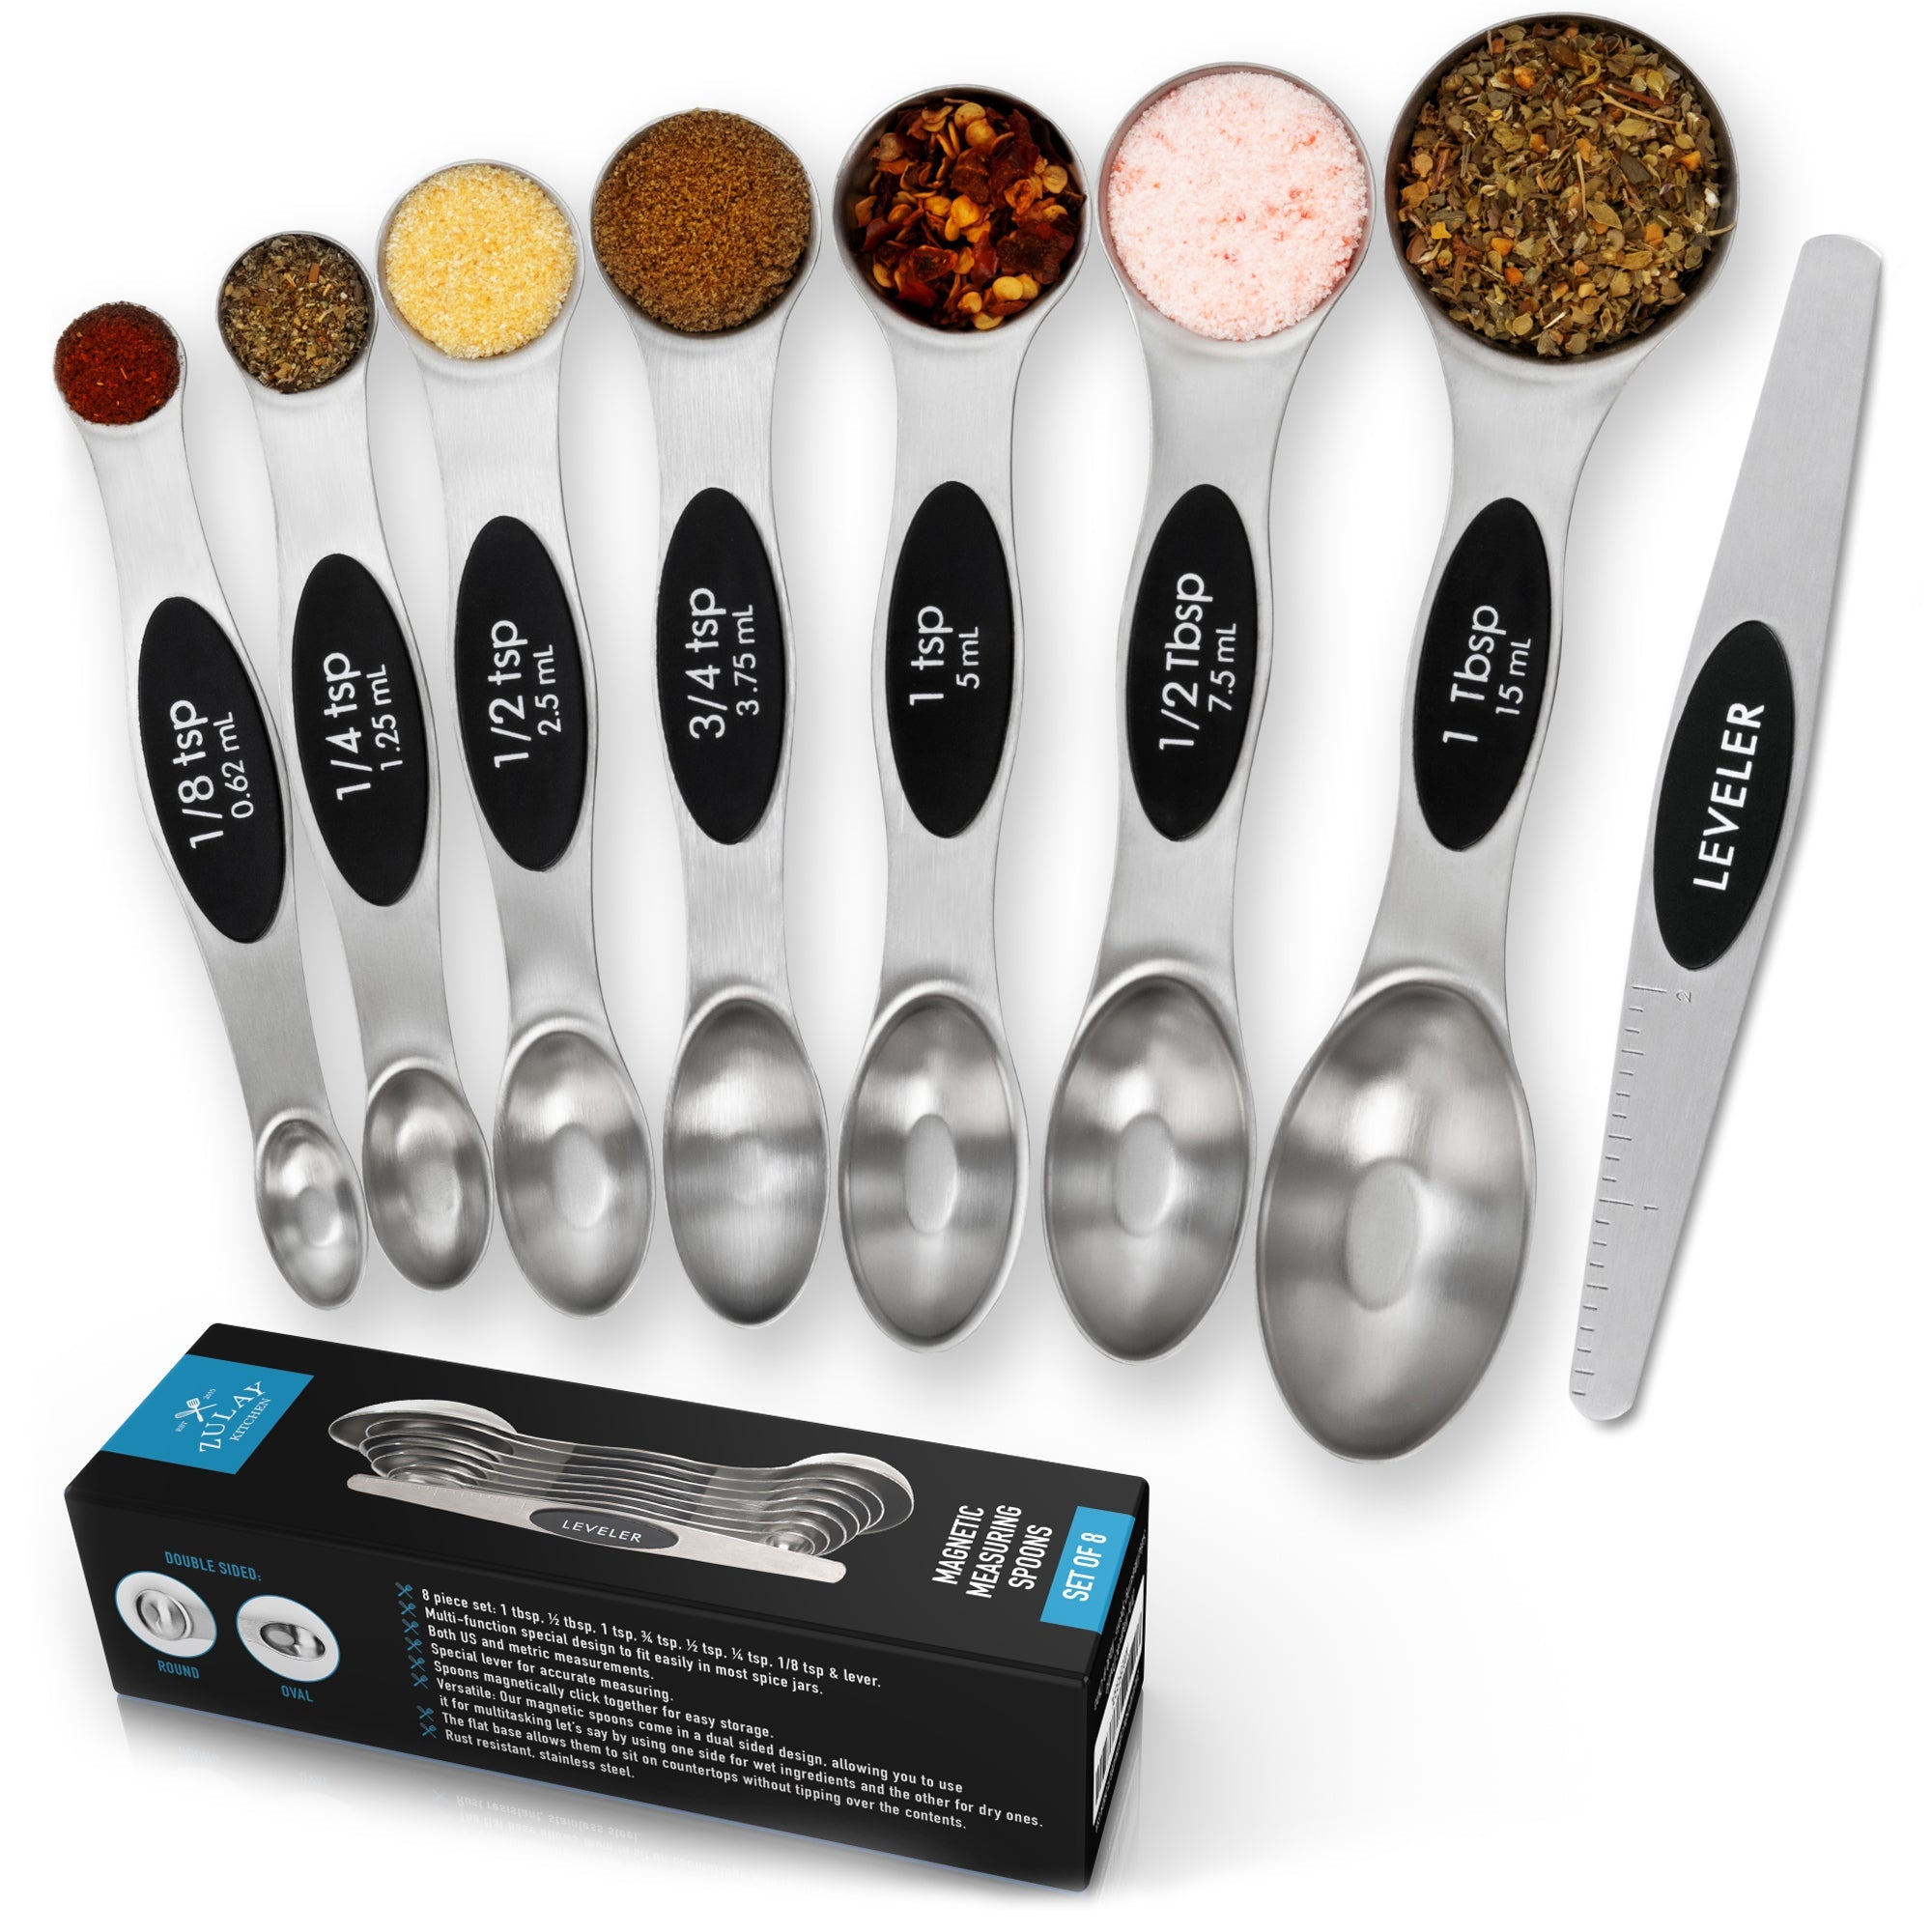 Zulay Kitchen Stainless Steel Measuring Spoons with Slim Design